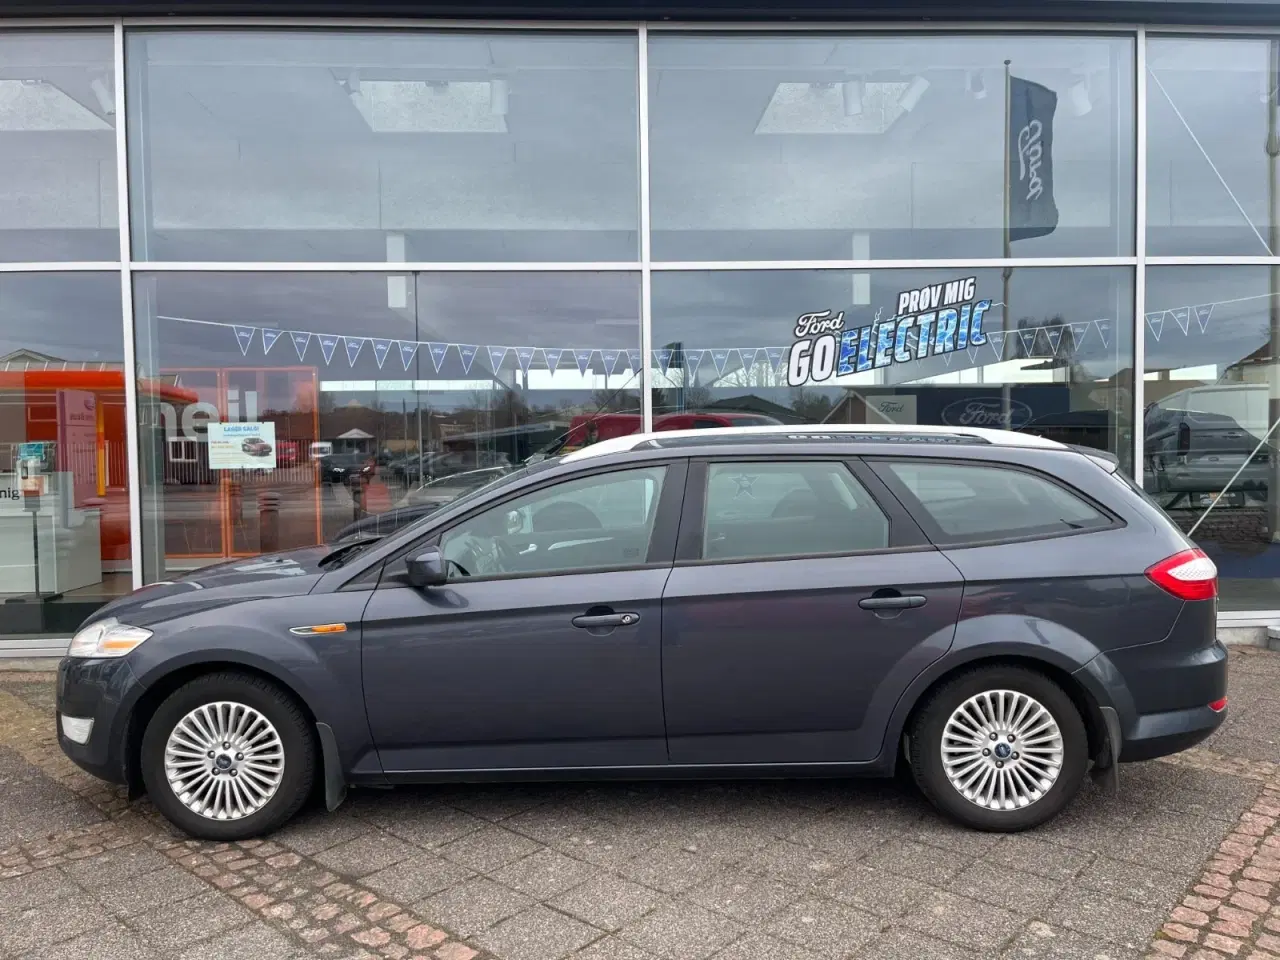 Billede 4 - Ford Mondeo 2,0 TDCi 115 ECOnetic stc.